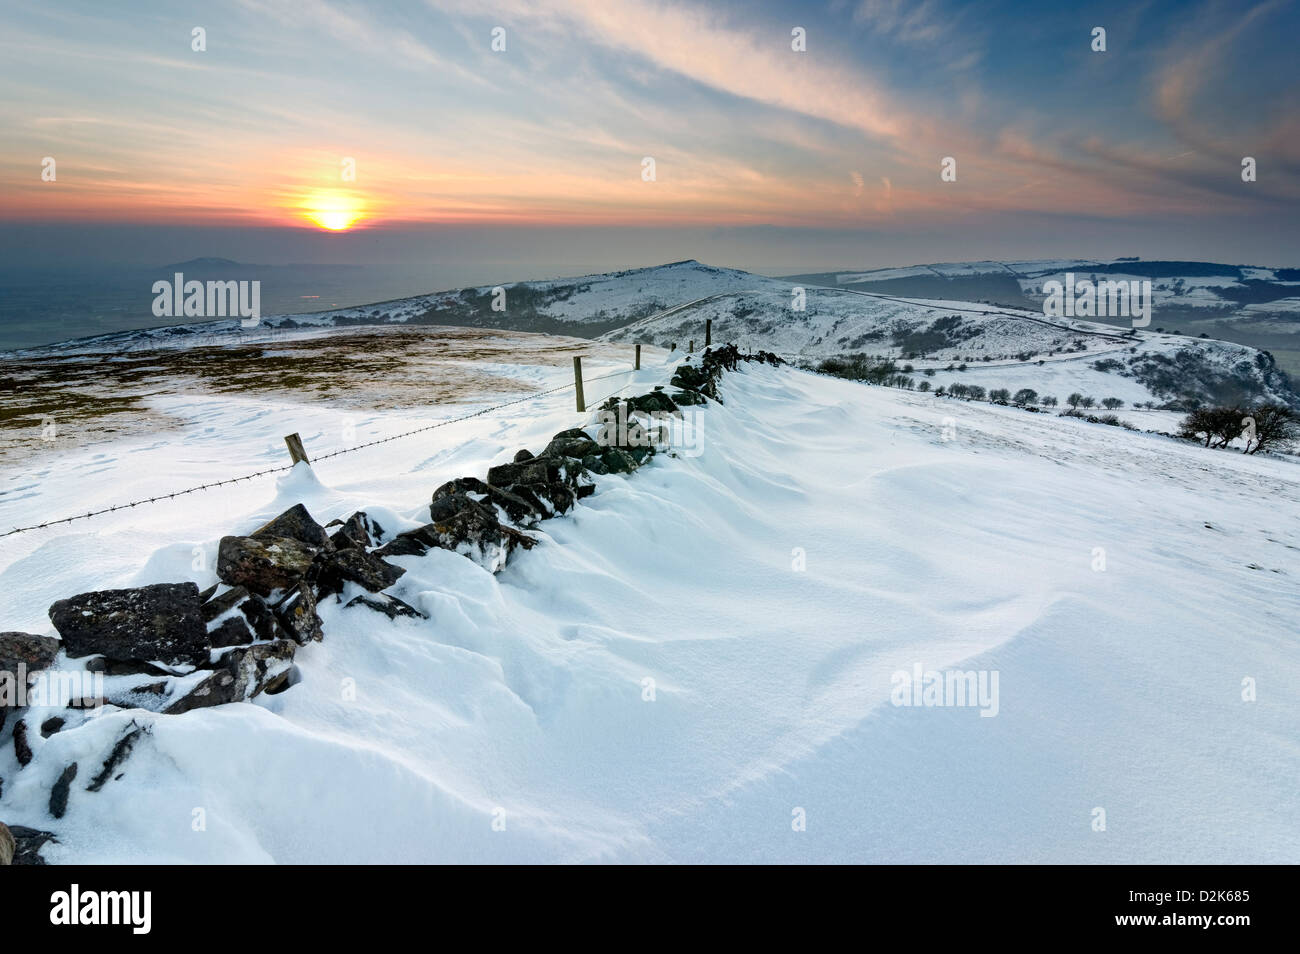 Snow and Winter on The Mendip Hills at Sunset, North Somerset, United Kingdom Stock Photo